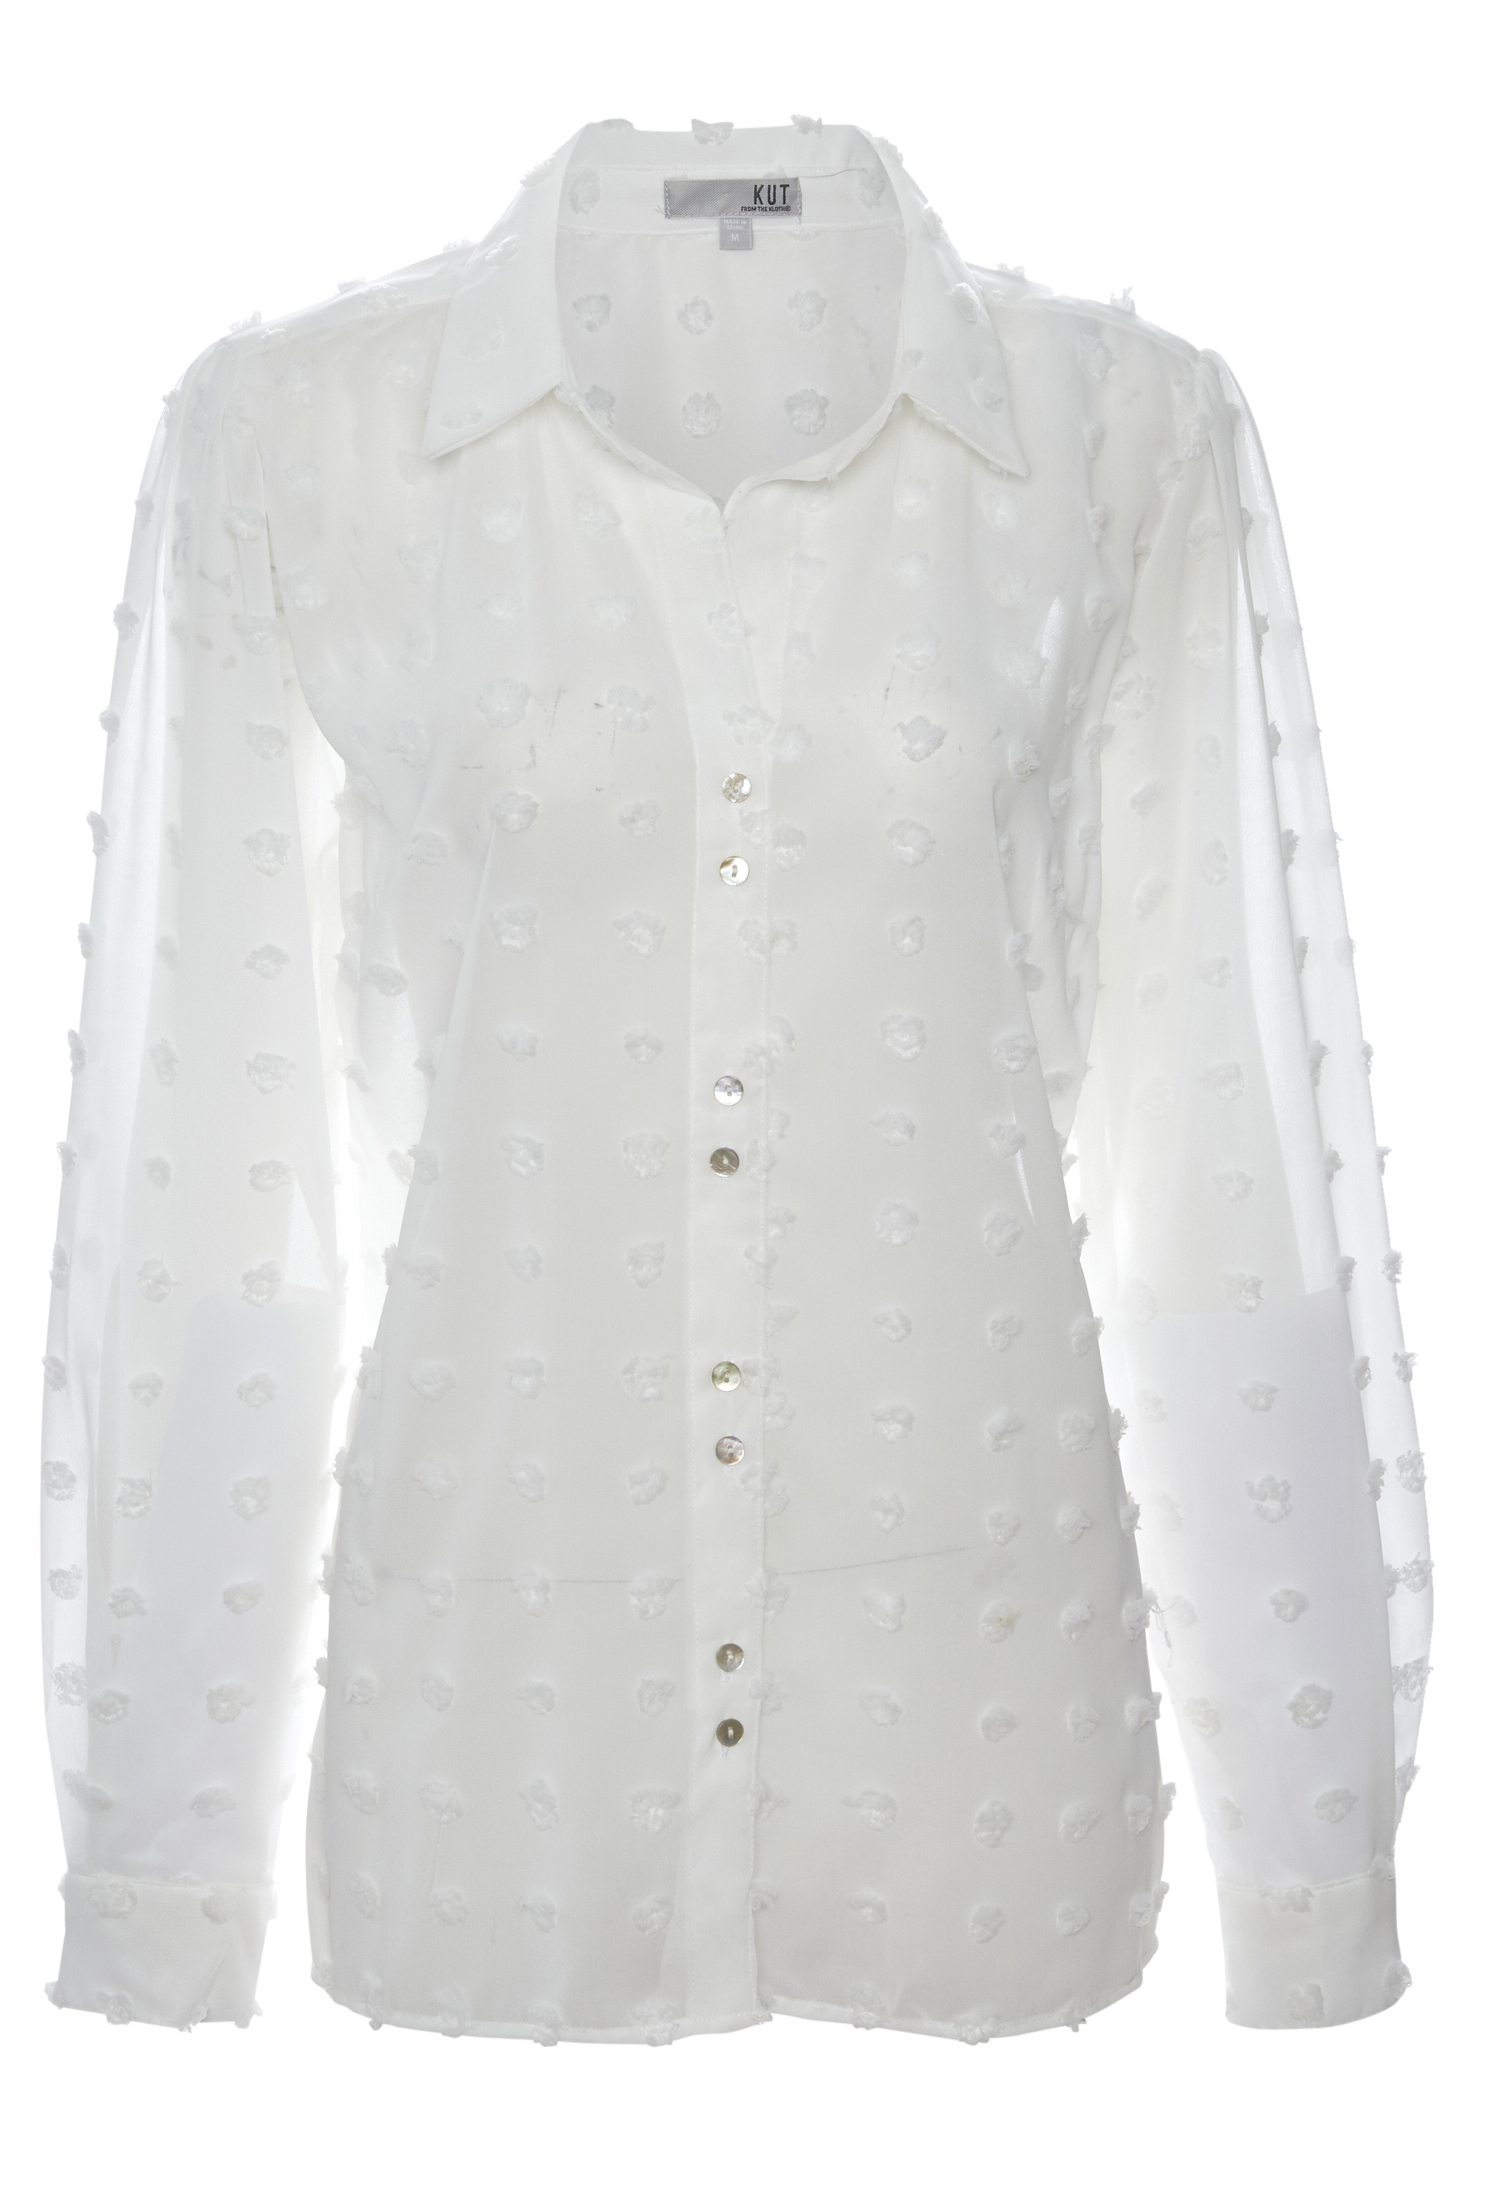 Kut from the Kloth Sheer Swiss Dot Blouse